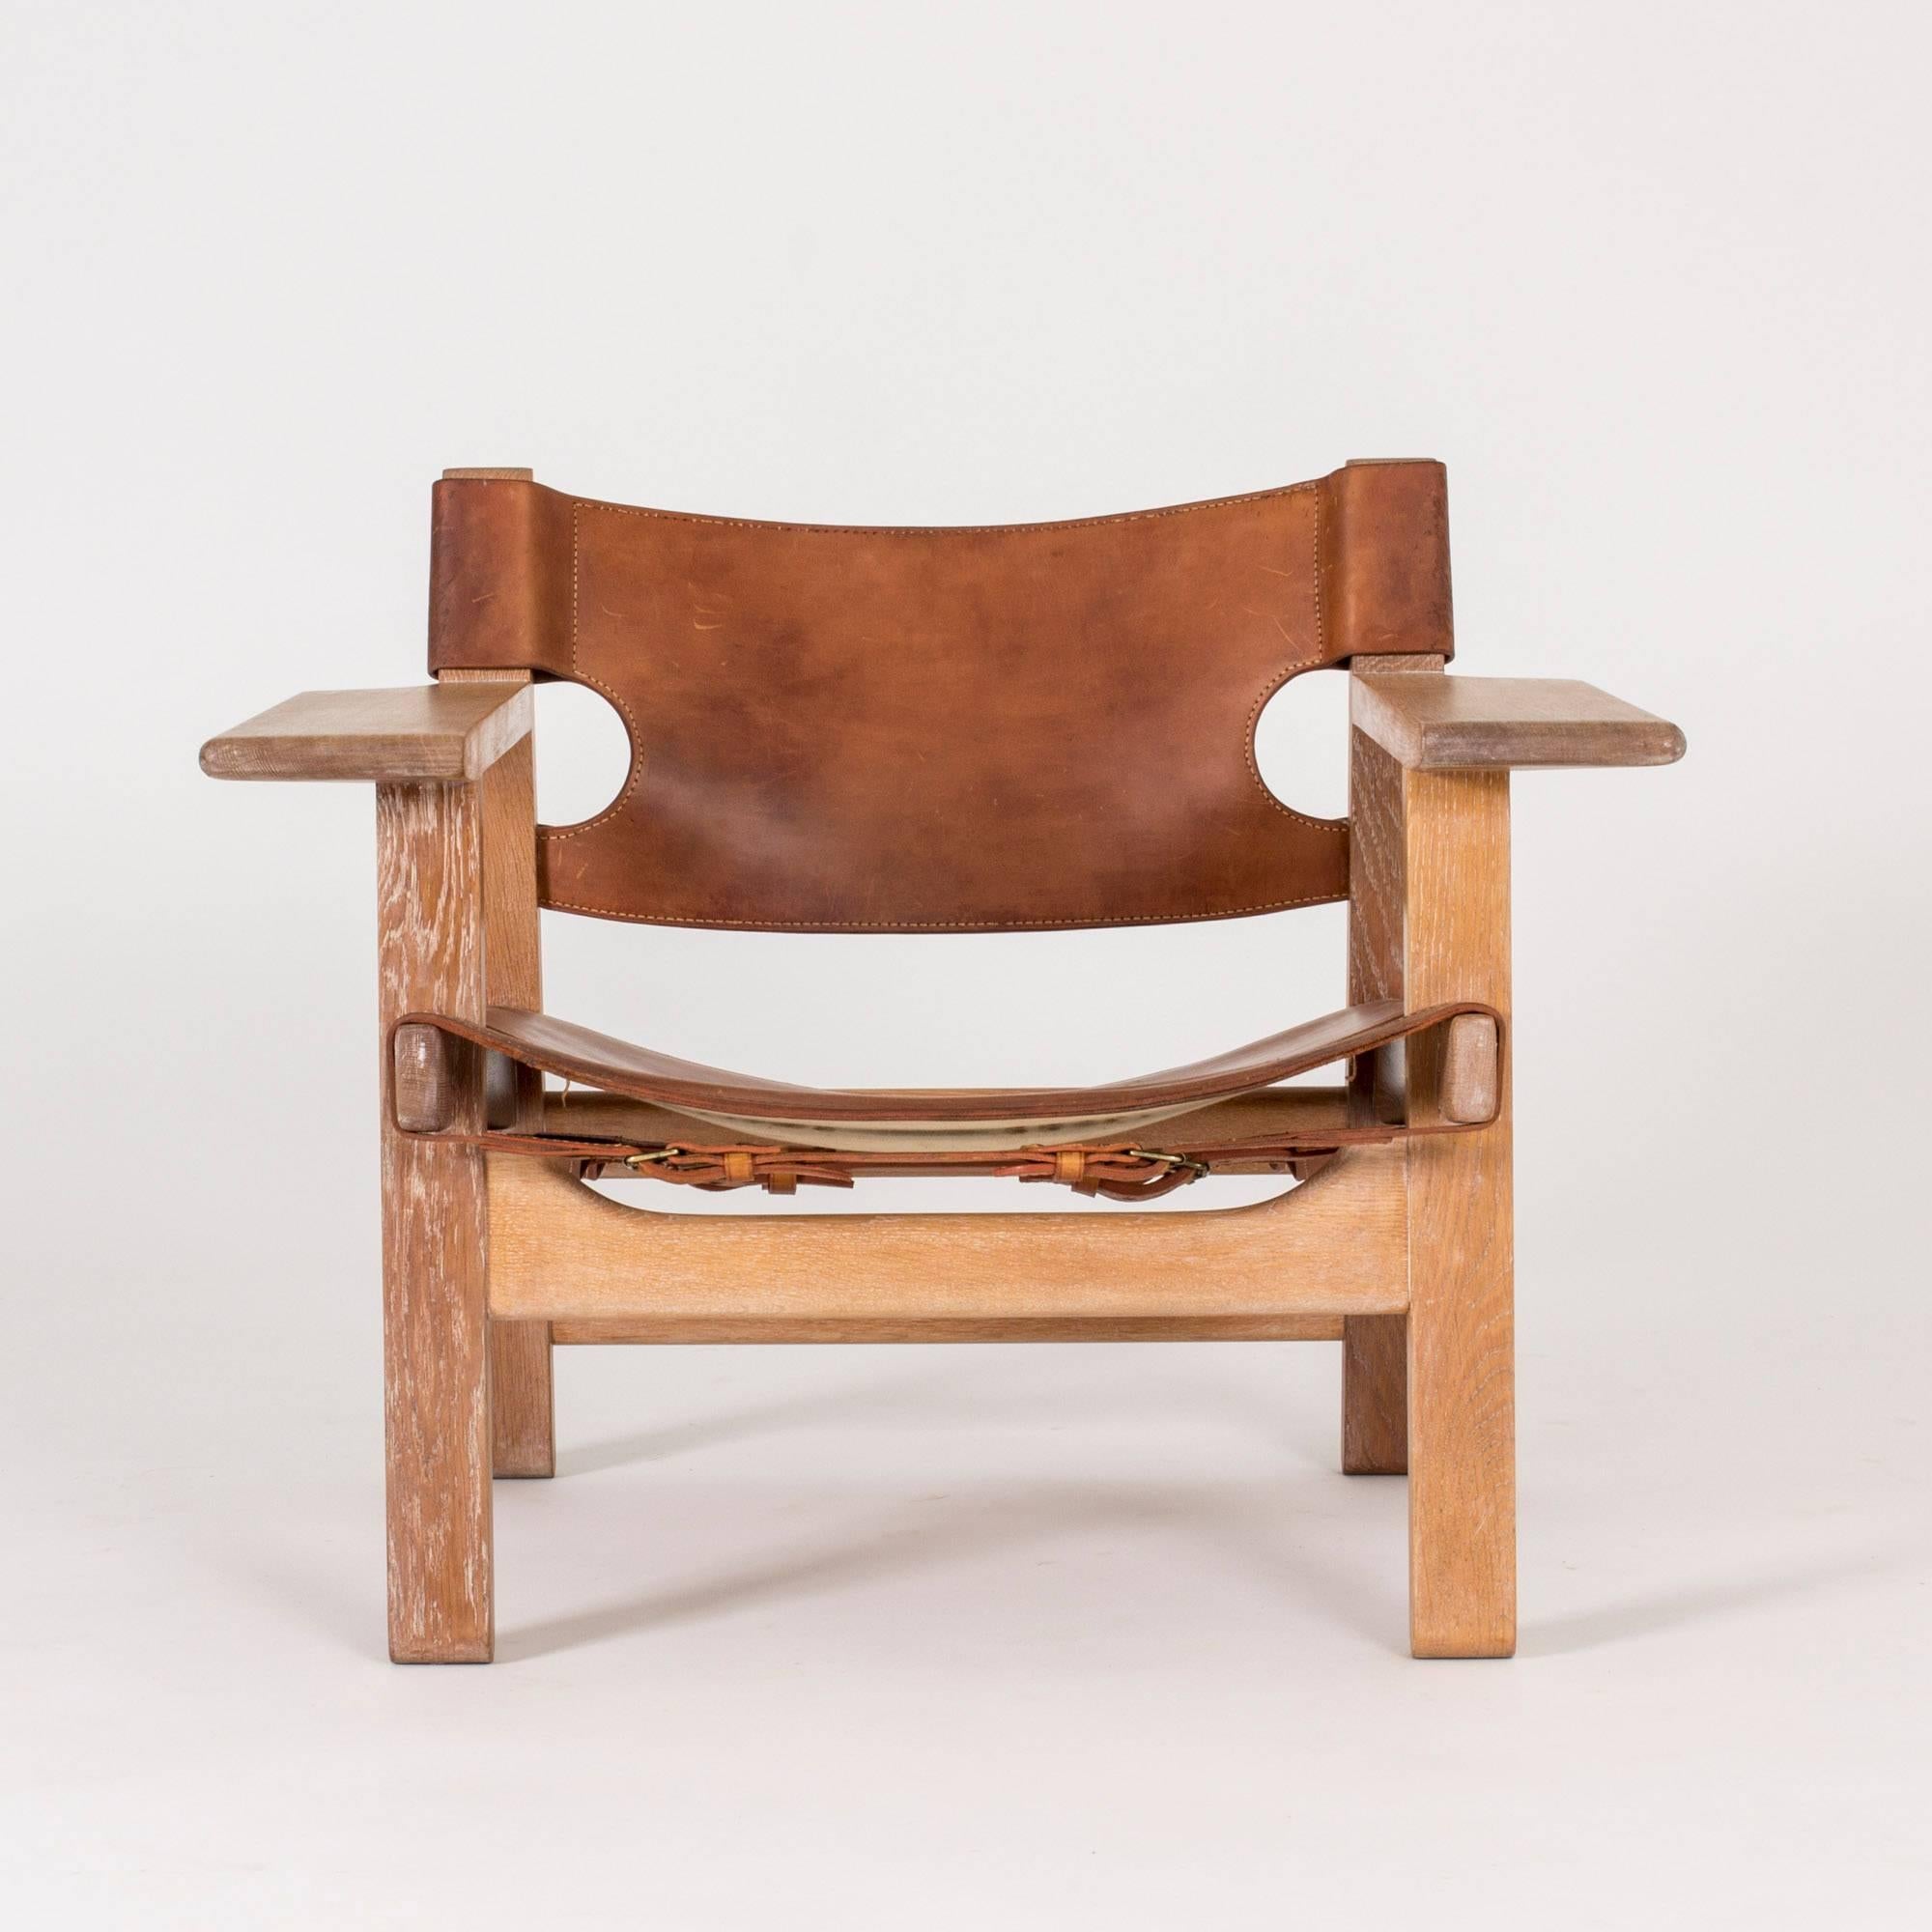 Iconic oak and cognac leather “Spanish Chair” lounge chair by Børge Mogensen. Mogensen got his inspiration for this design from a trip to Spain in 1958, where he came across a type of traditional chair which he then interpreted in a modernist way.